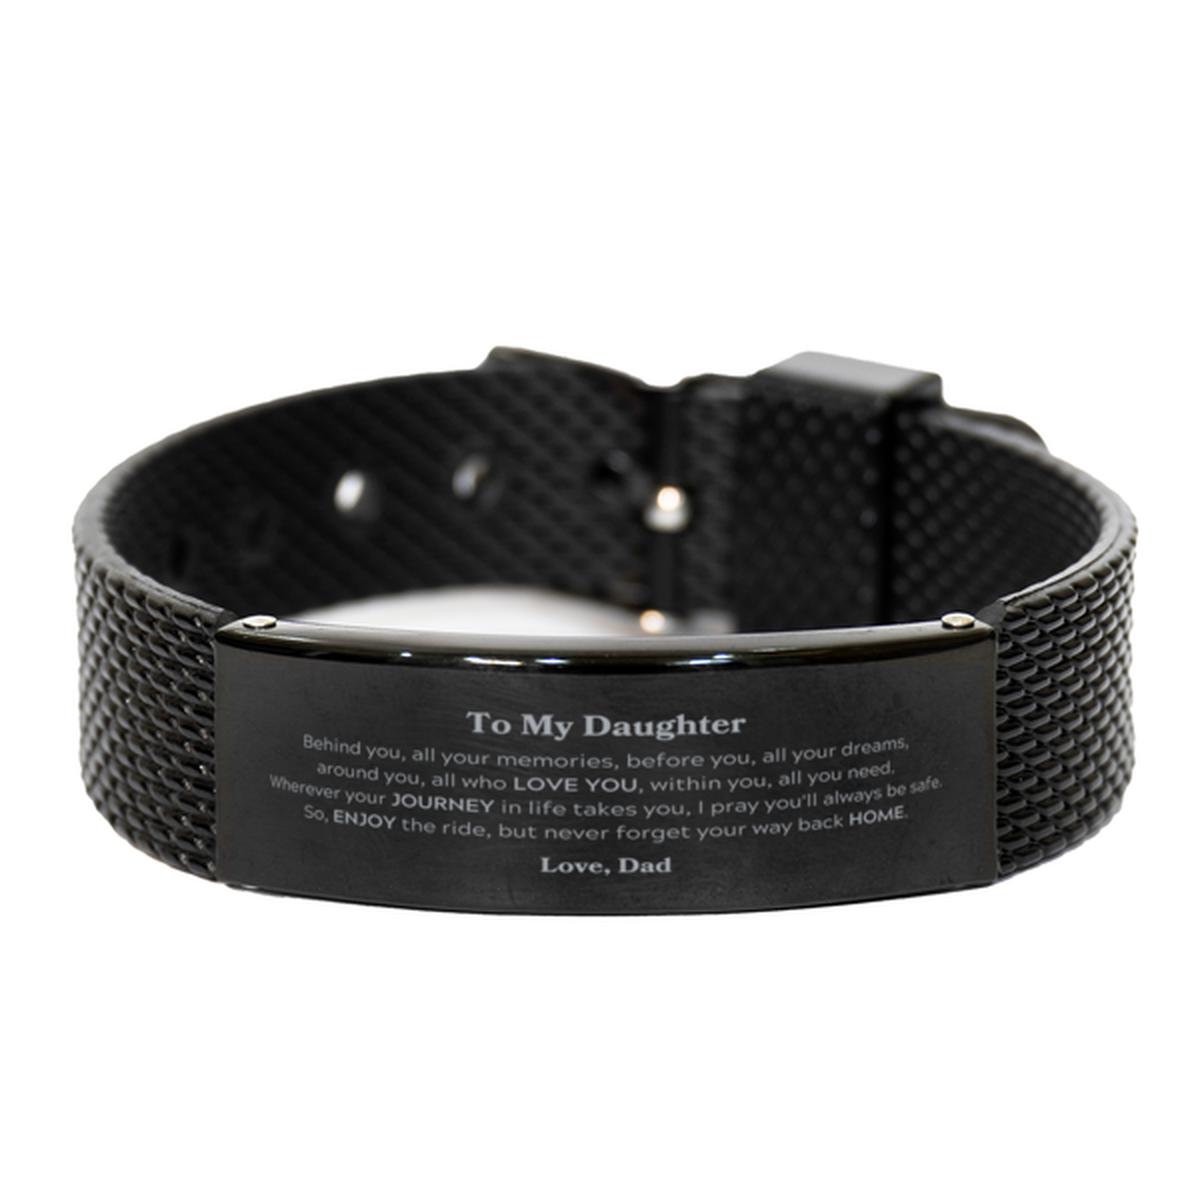 To My Daughter Graduation Gifts from Dad, Daughter Black Shark Mesh Bracelet Christmas Birthday Gifts for Daughter Behind you, all your memories, before you, all your dreams. Love, Dad